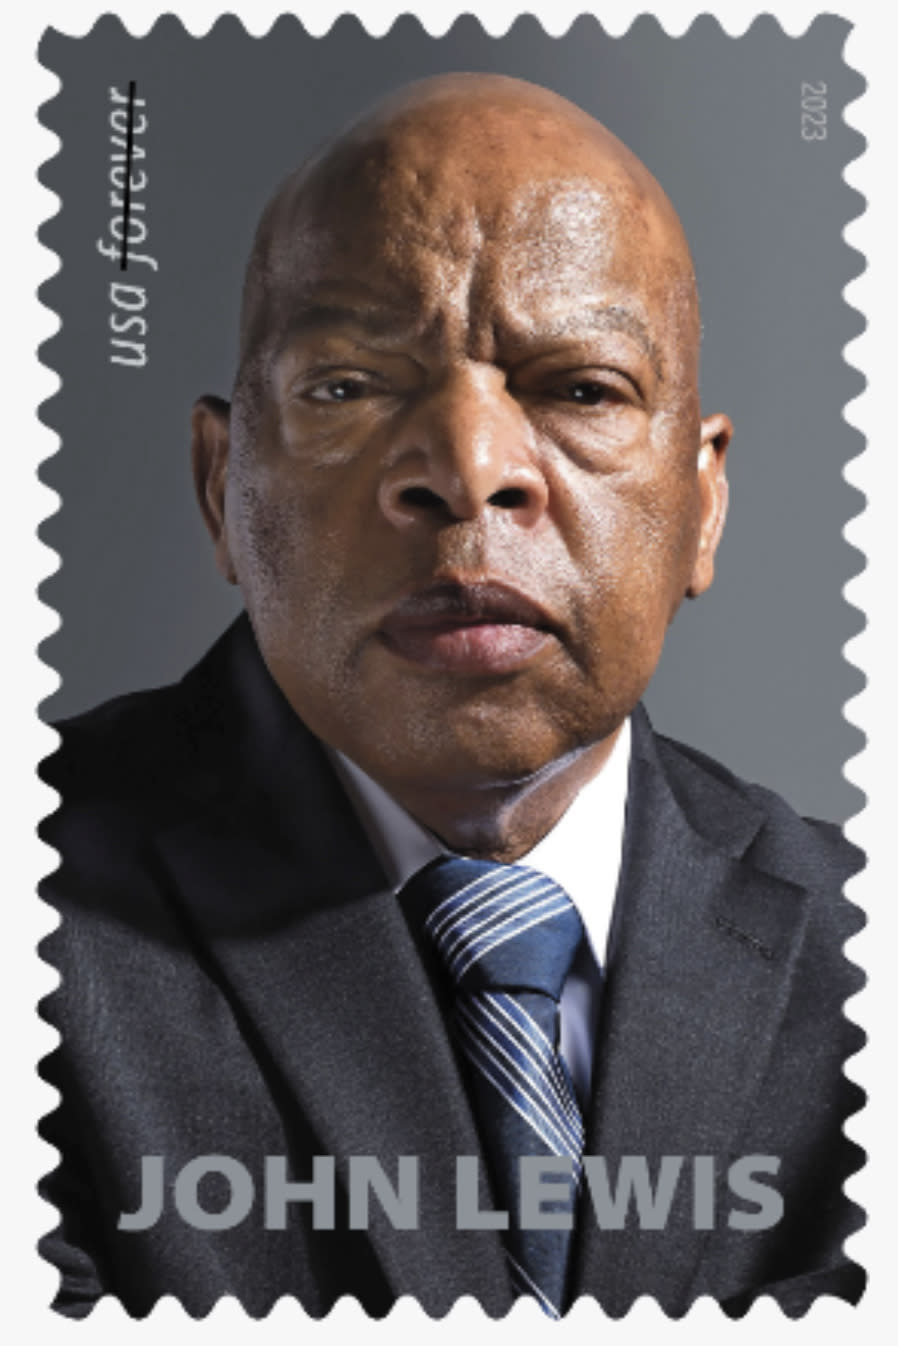 This image provided by the U.S. Postal Service on Tuesday, Dec. 13, 2022, shows a new postage stamp honoring the late congressman and civil rights giant John Lewis. (U.S. Postal Service via AP0